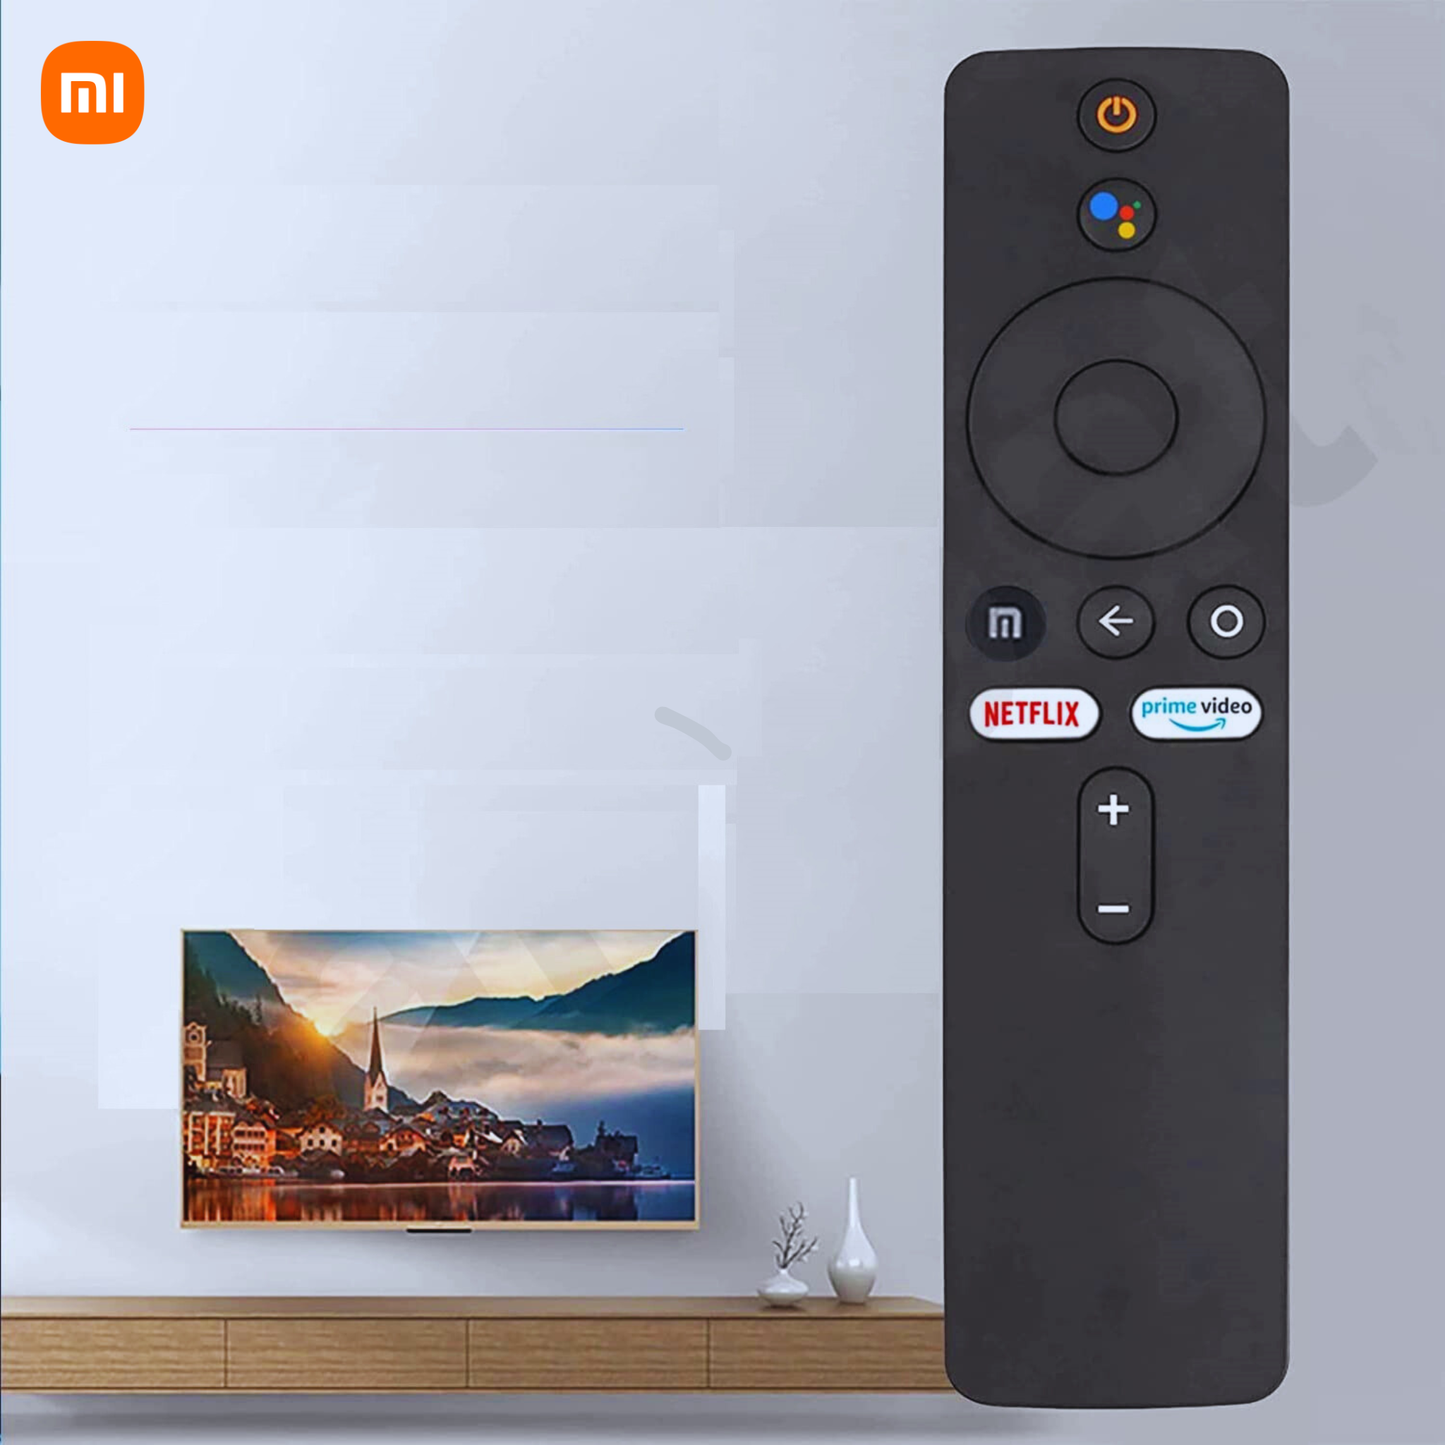 MI smart led tv remote with voice